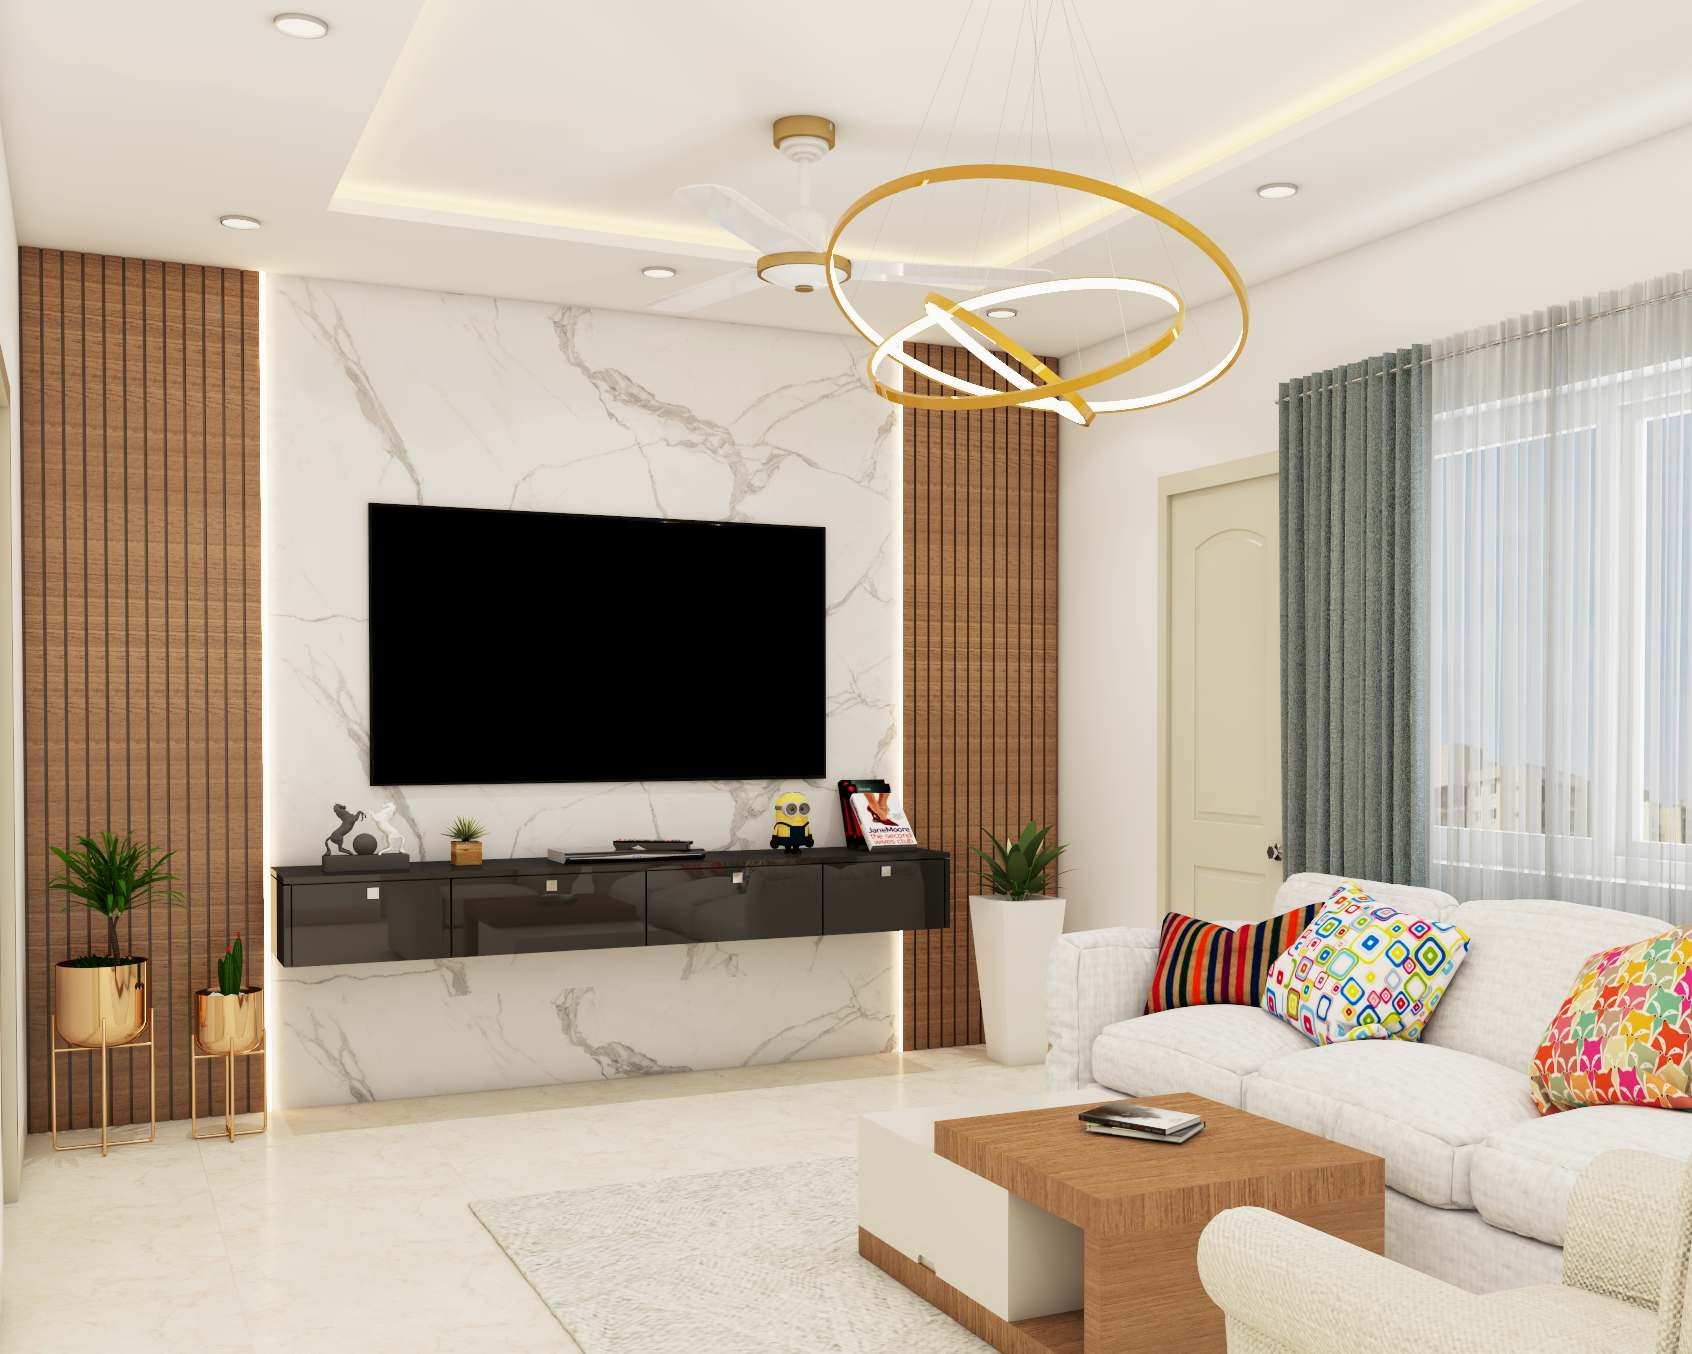 Premium TV Unit Design with Fluted Panels and Black Wall-Mounted Storage